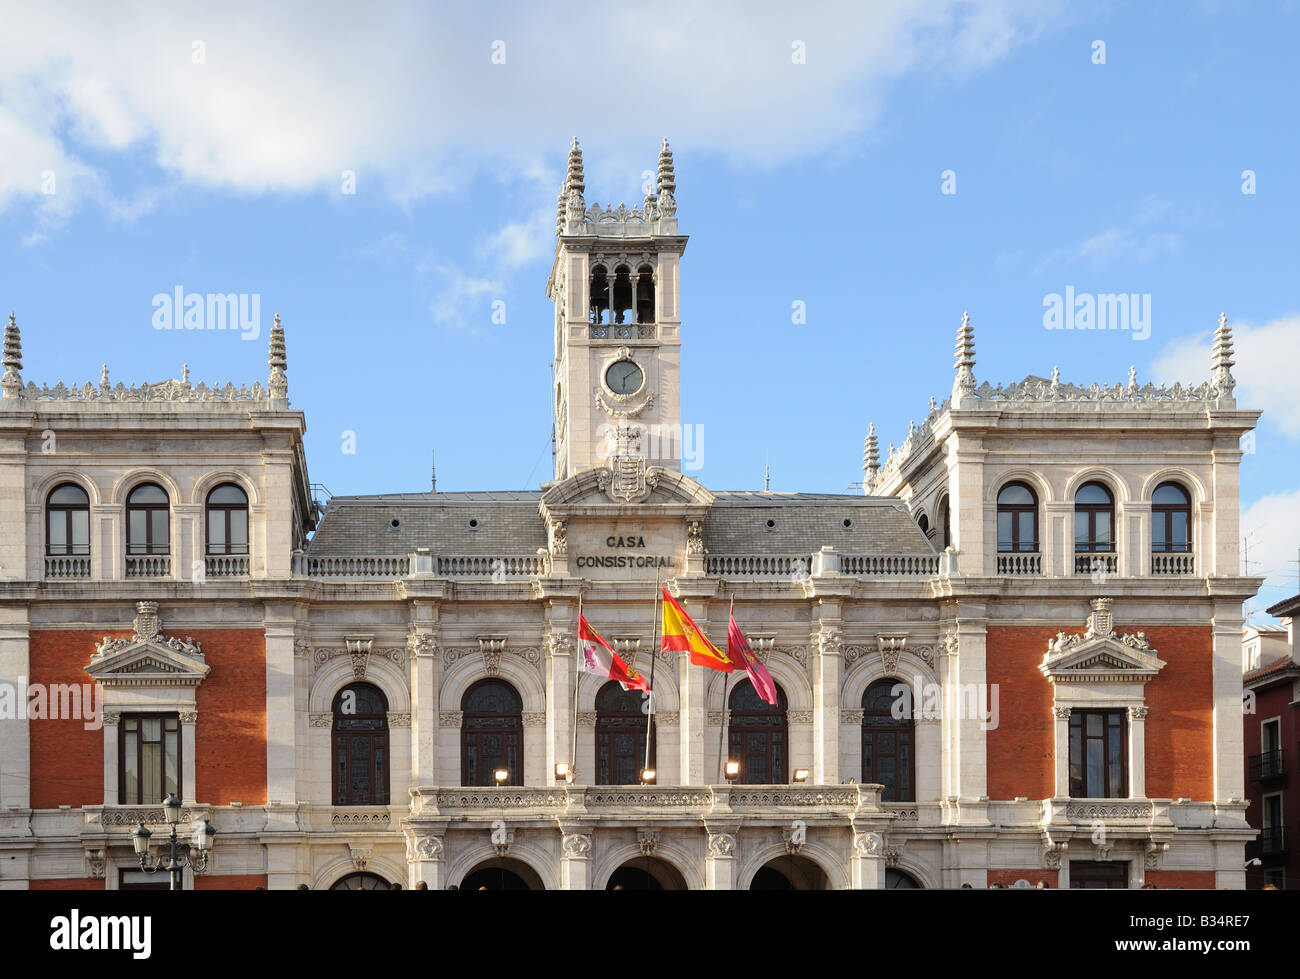 The facade and clock tower of the CASA CONSISTORIAL or Town Hall City Council building in the main square Valladolid Spain Stock Photo